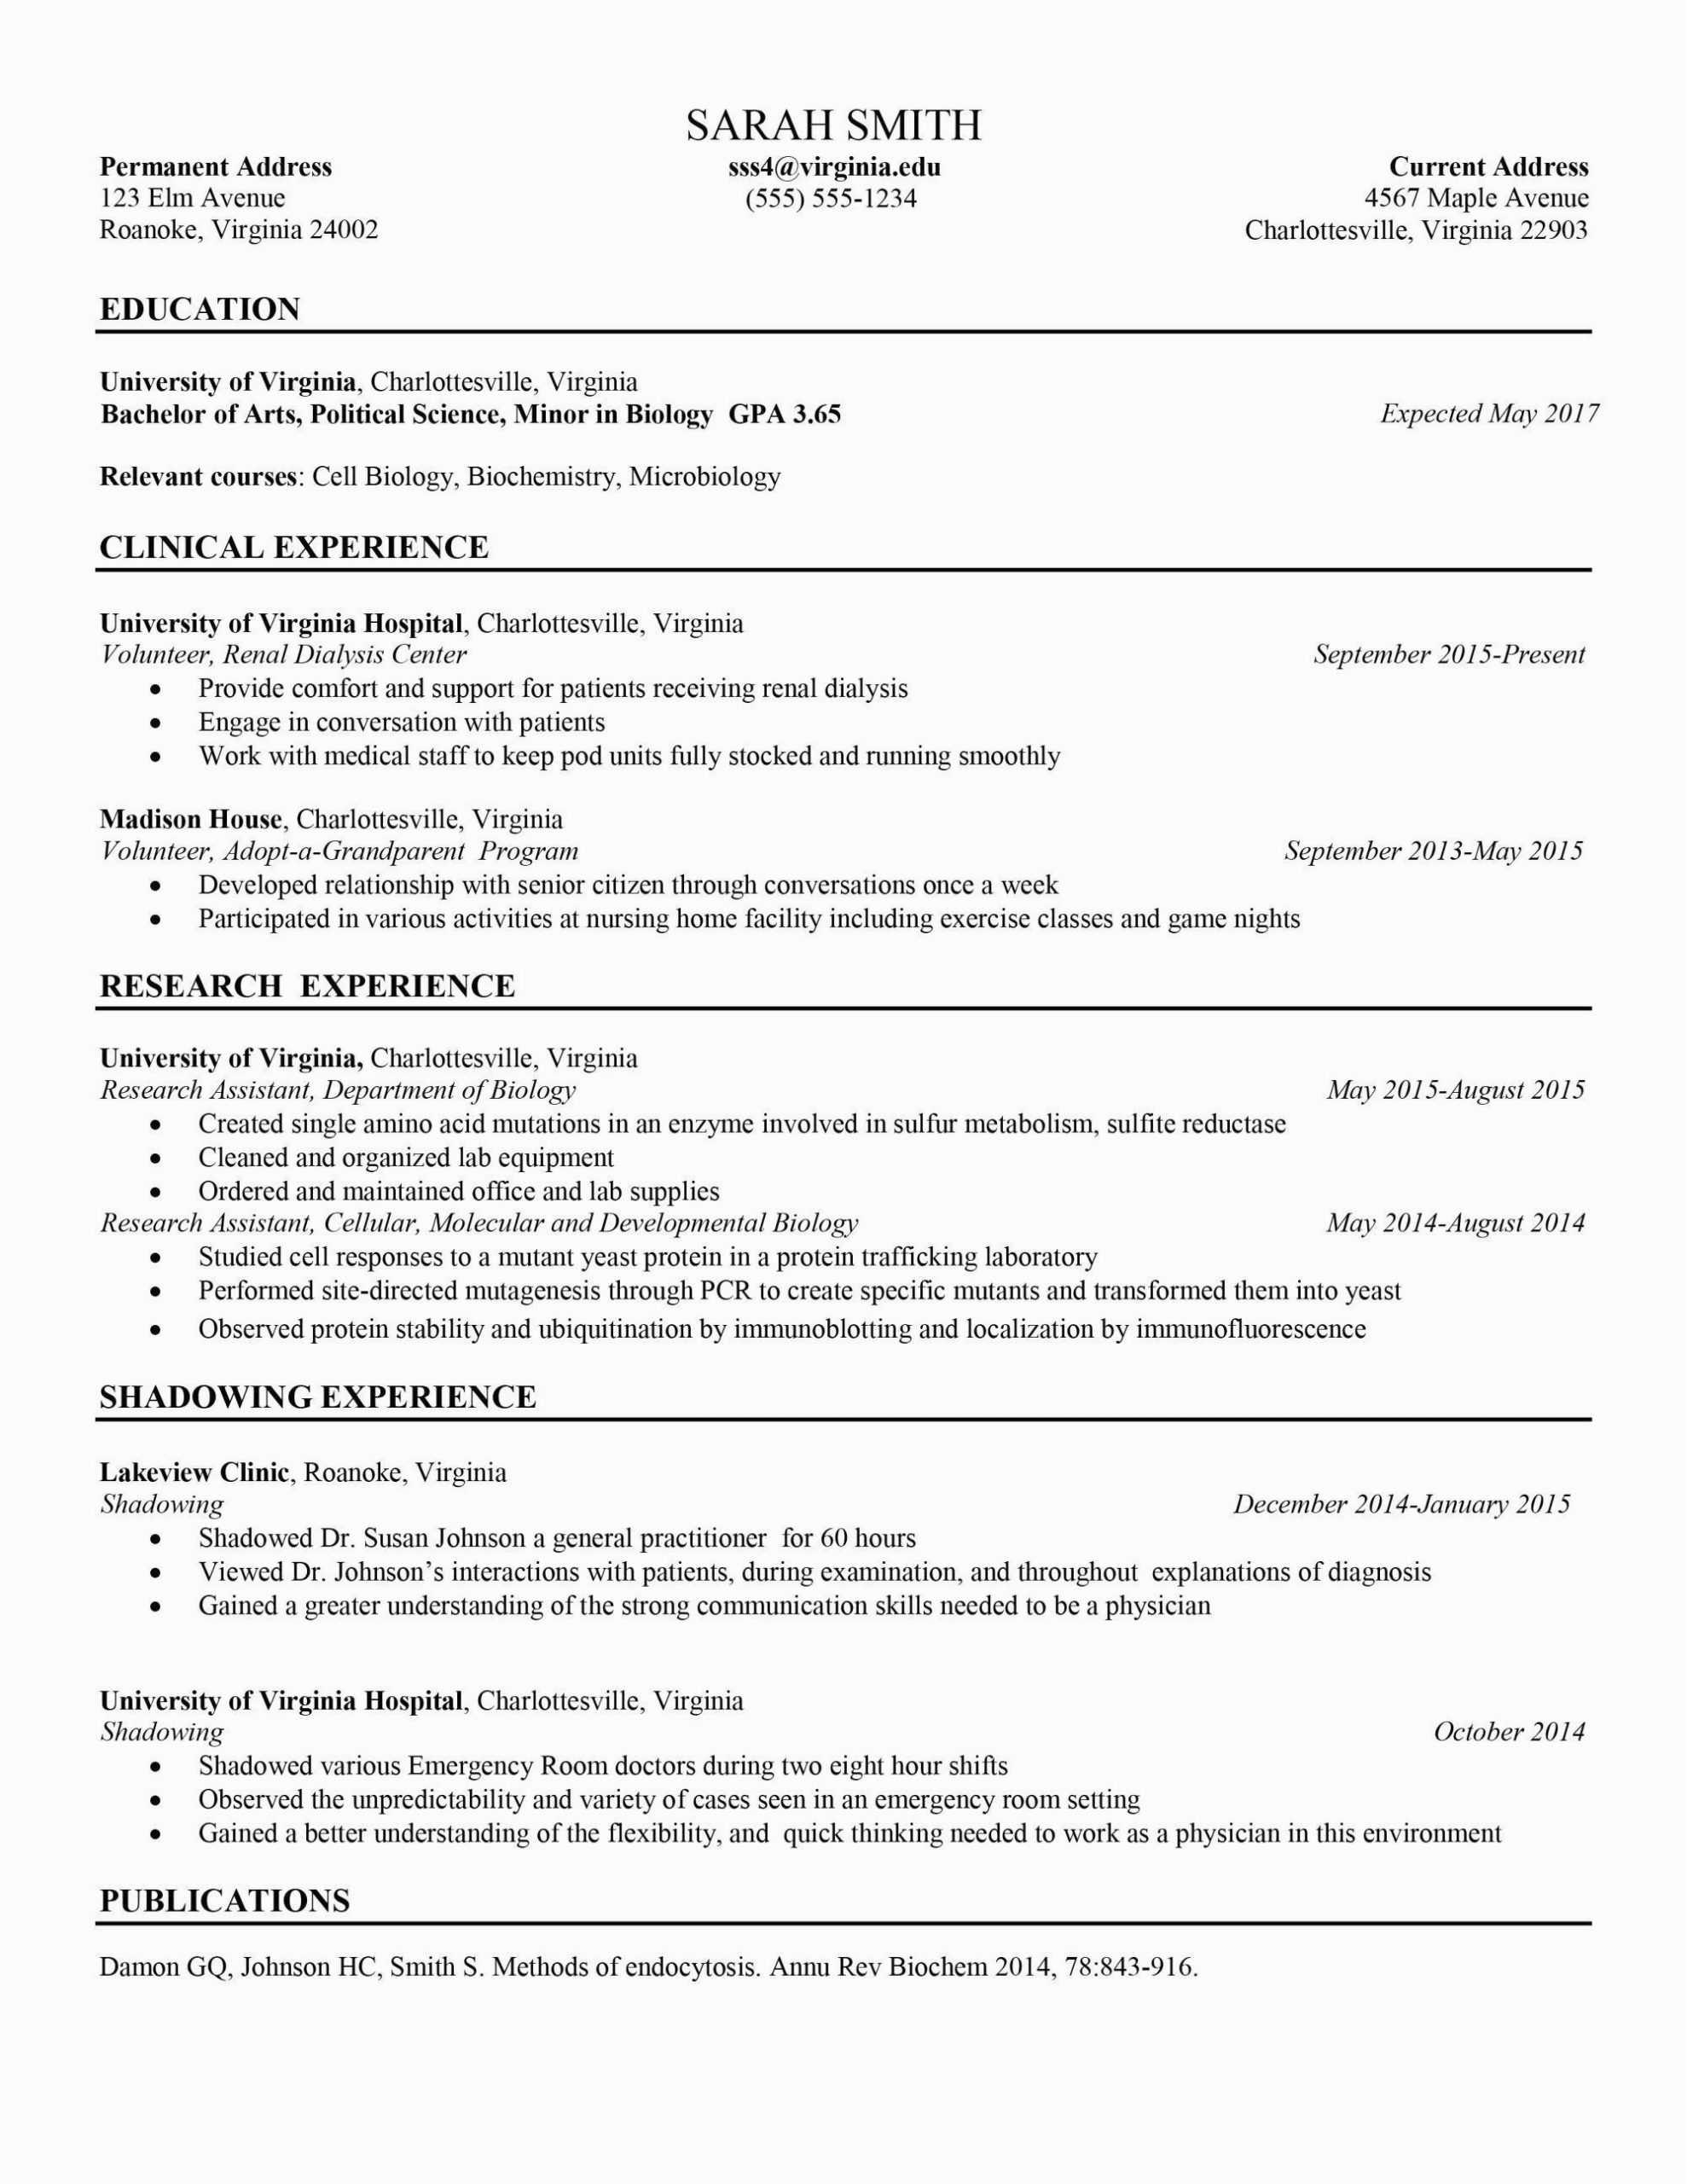 Resume Sample for Recent Graduate with Entry Level Expirience 32 Awesome Entry Level Nurse Practitioner Resume In 2020